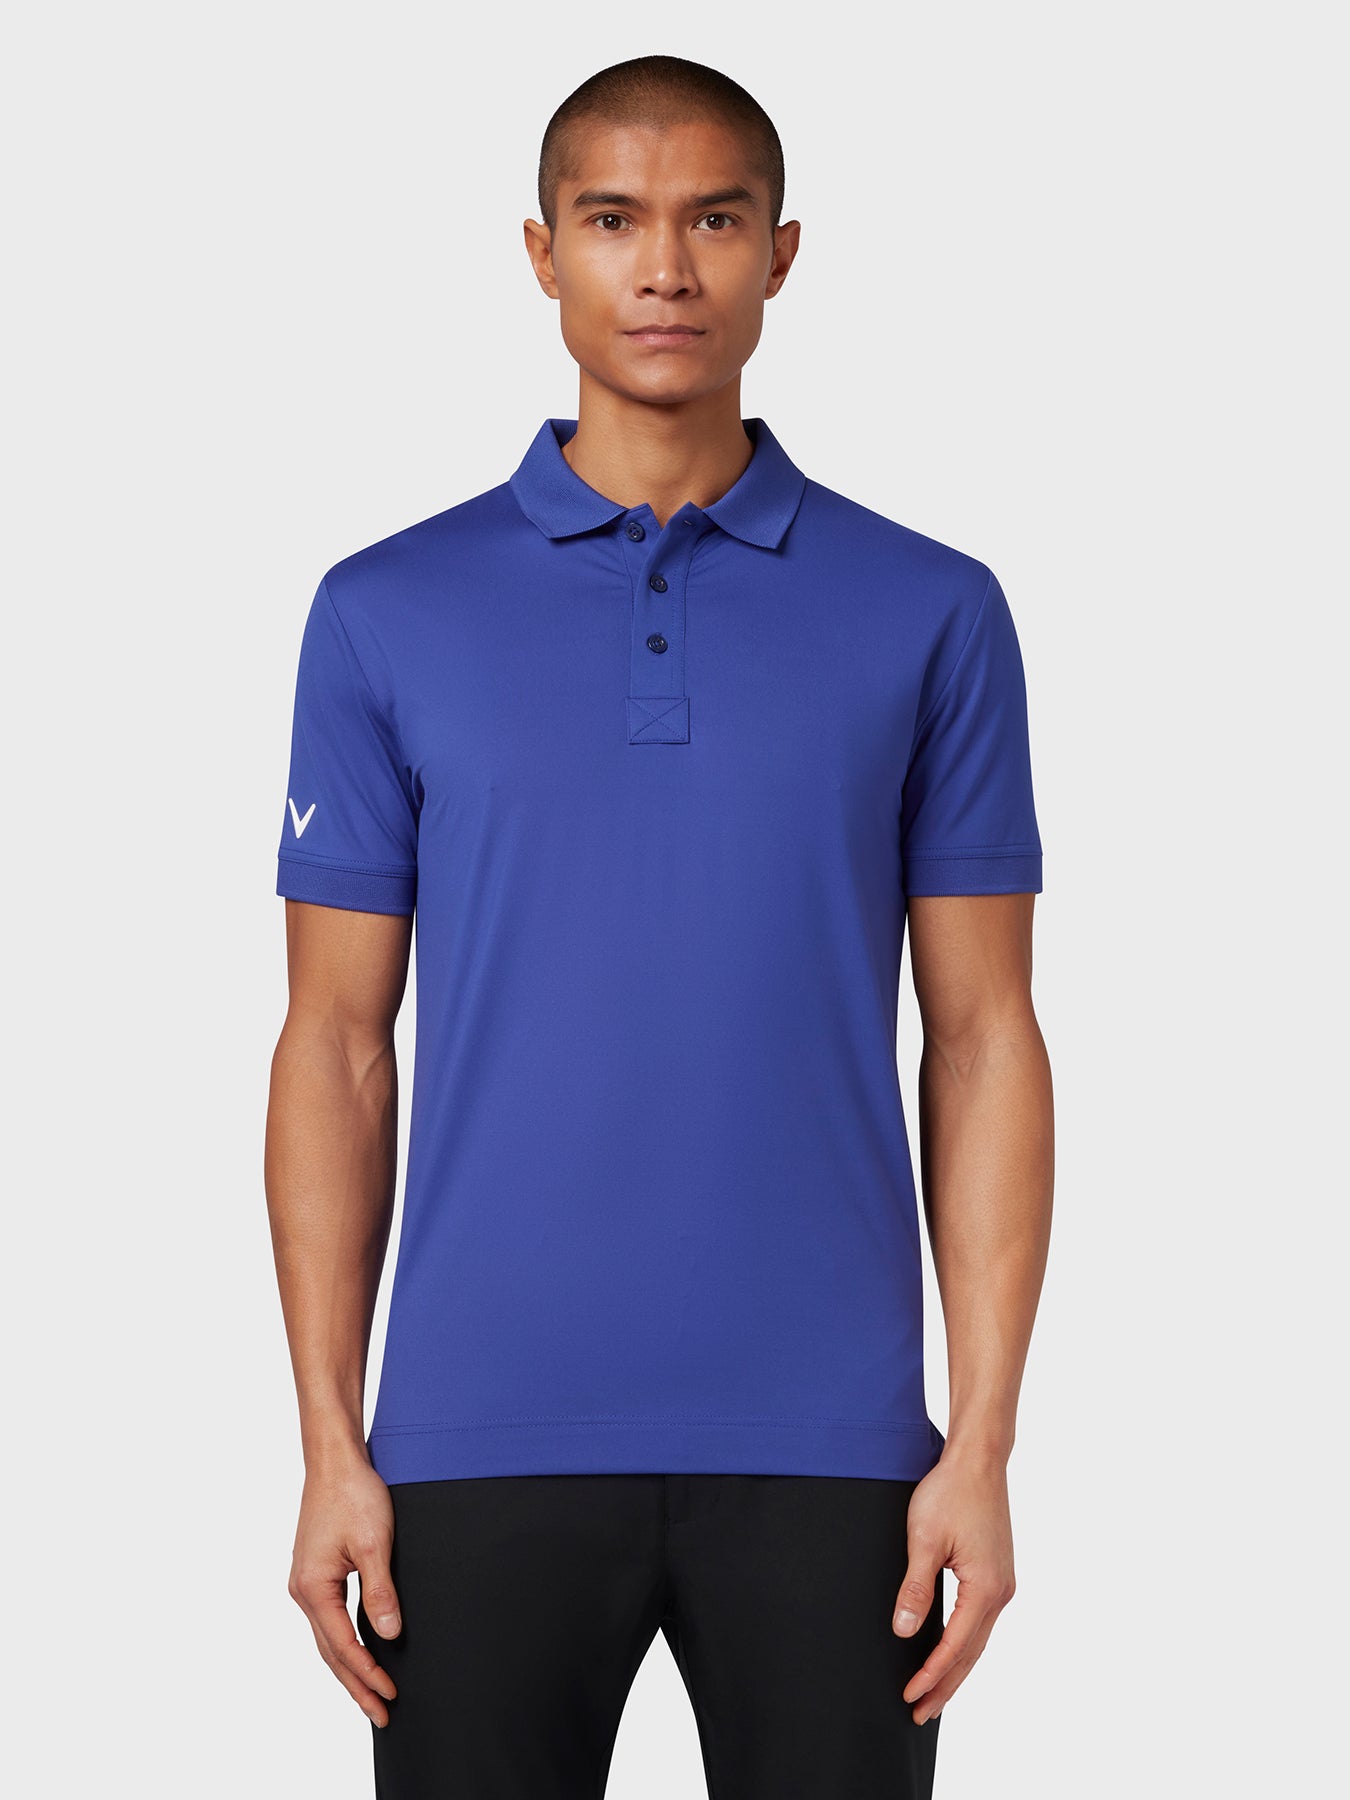 View X Series Solid Ribbed Polo In Clematis Blue Clematis Blue M information